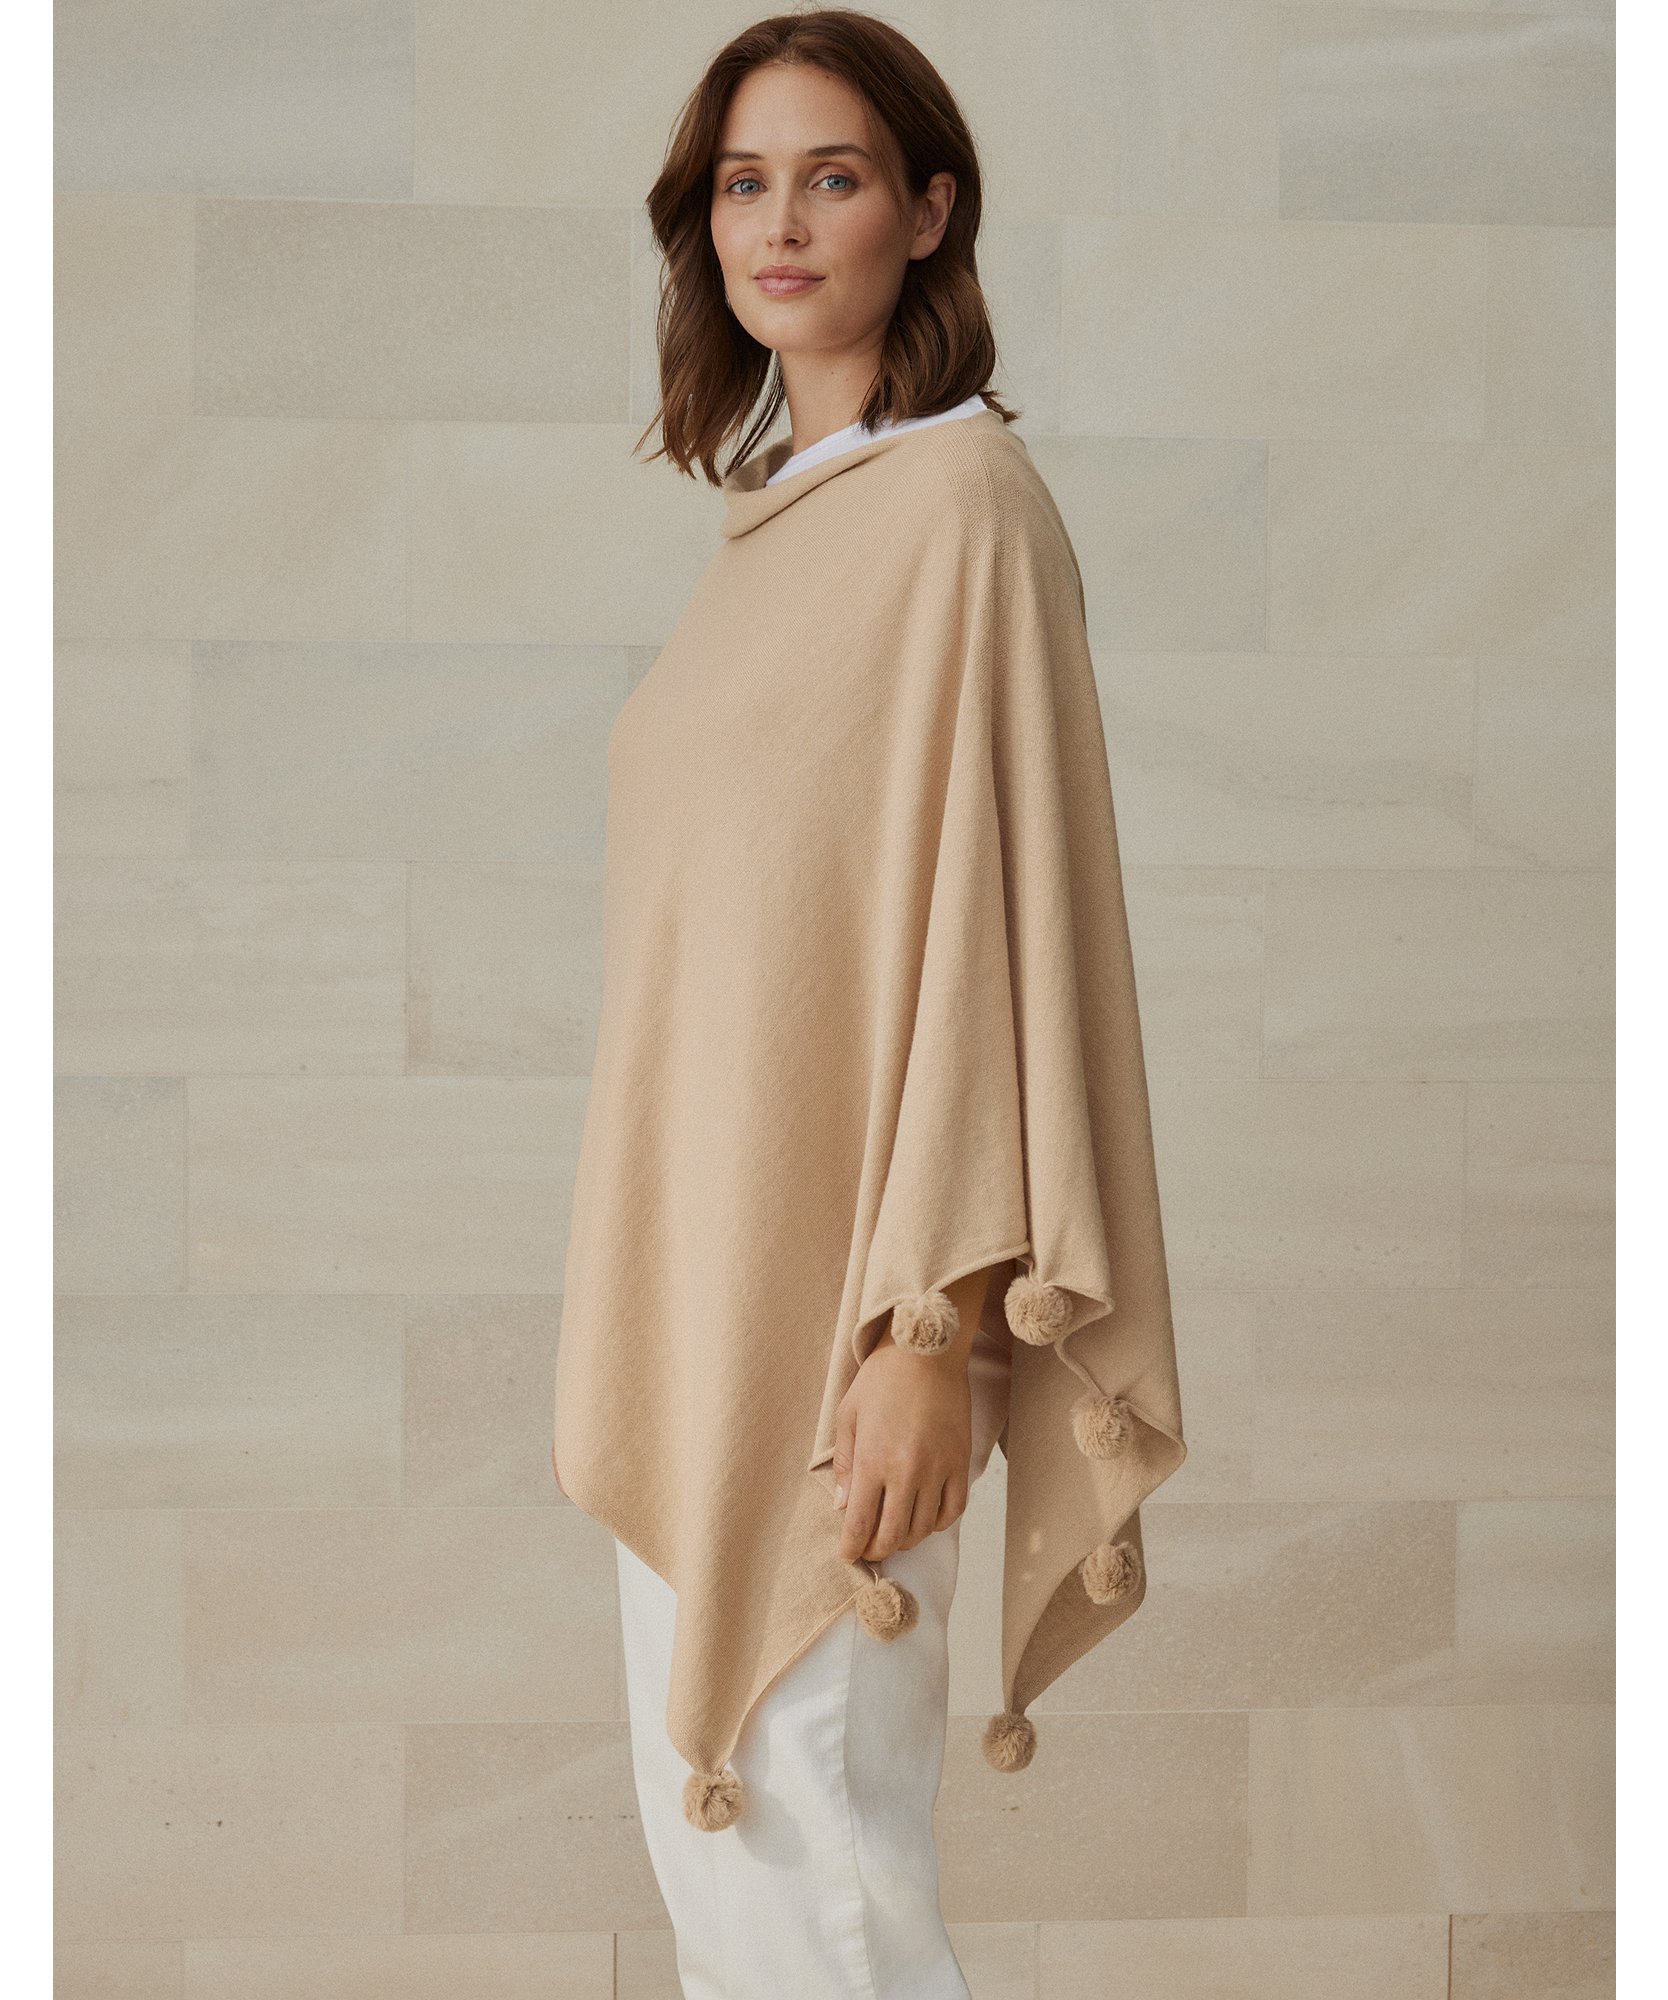 Pale Fawn The White Company Women Clothing Jackets Ponchos & Capes One Size Organic-Cotton-Cashmere Pom-Pom Poncho 